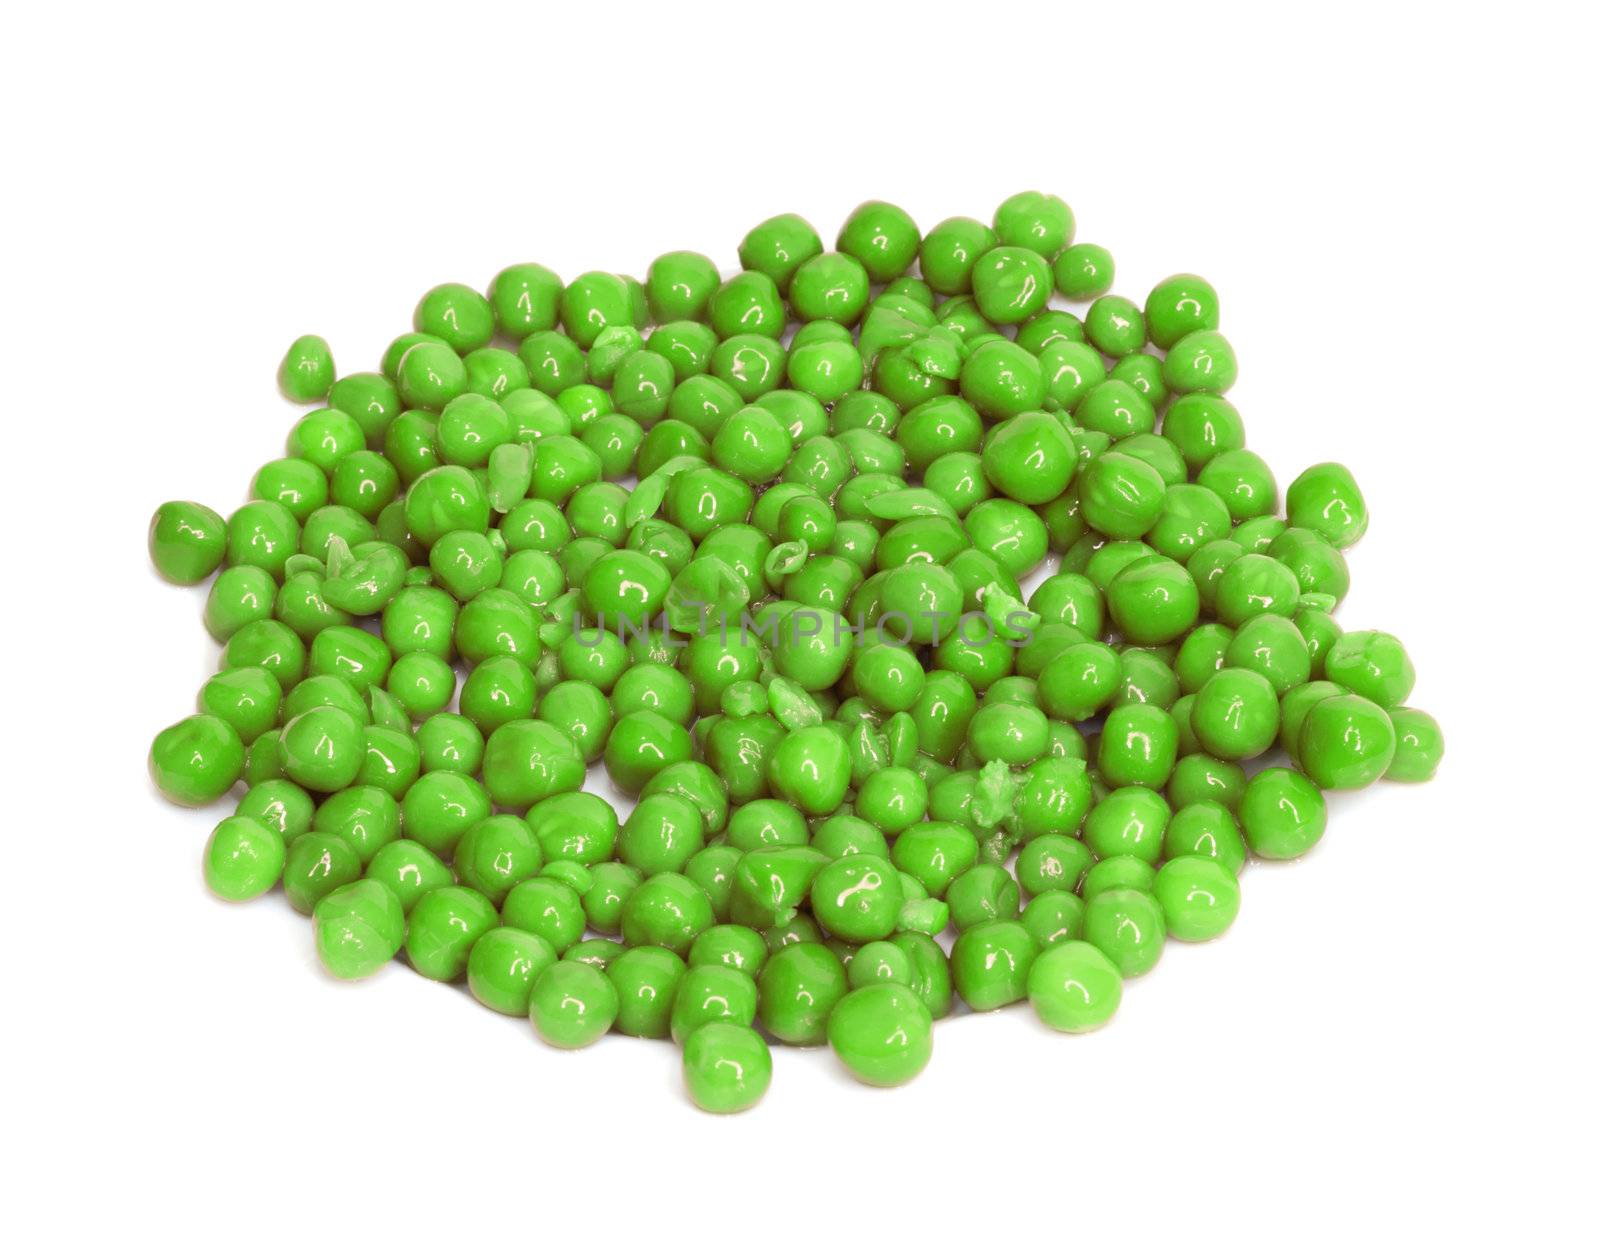 green peas isolated on a white background by schankz